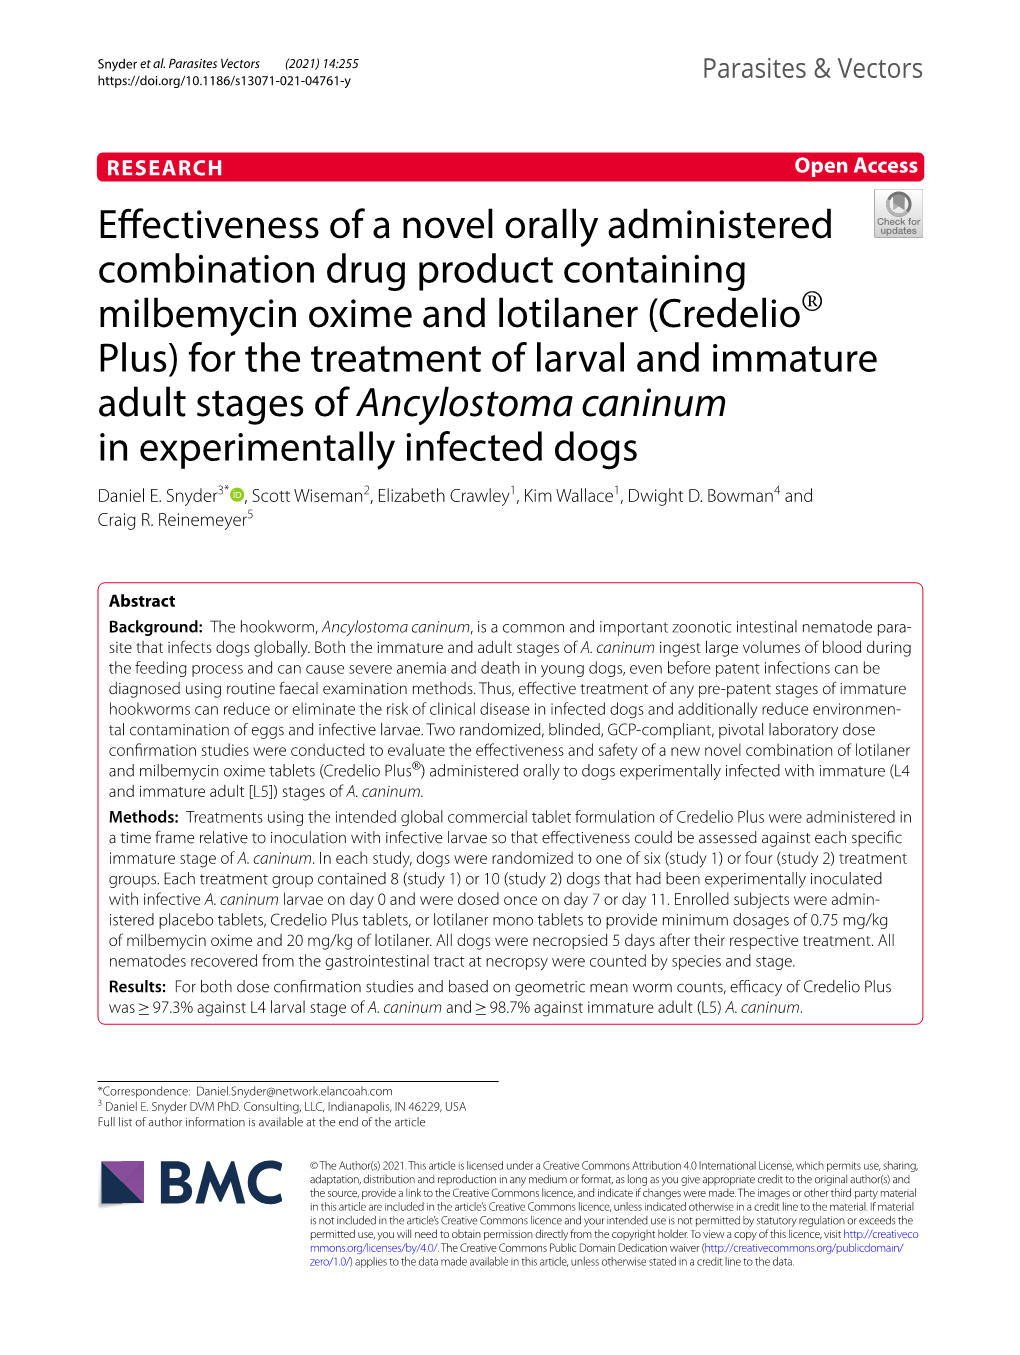 Effectiveness of a Novel Orally Administered Combination Drug Product Containing Milbemycin Oxime and Lotilaner (Credelio® Plus